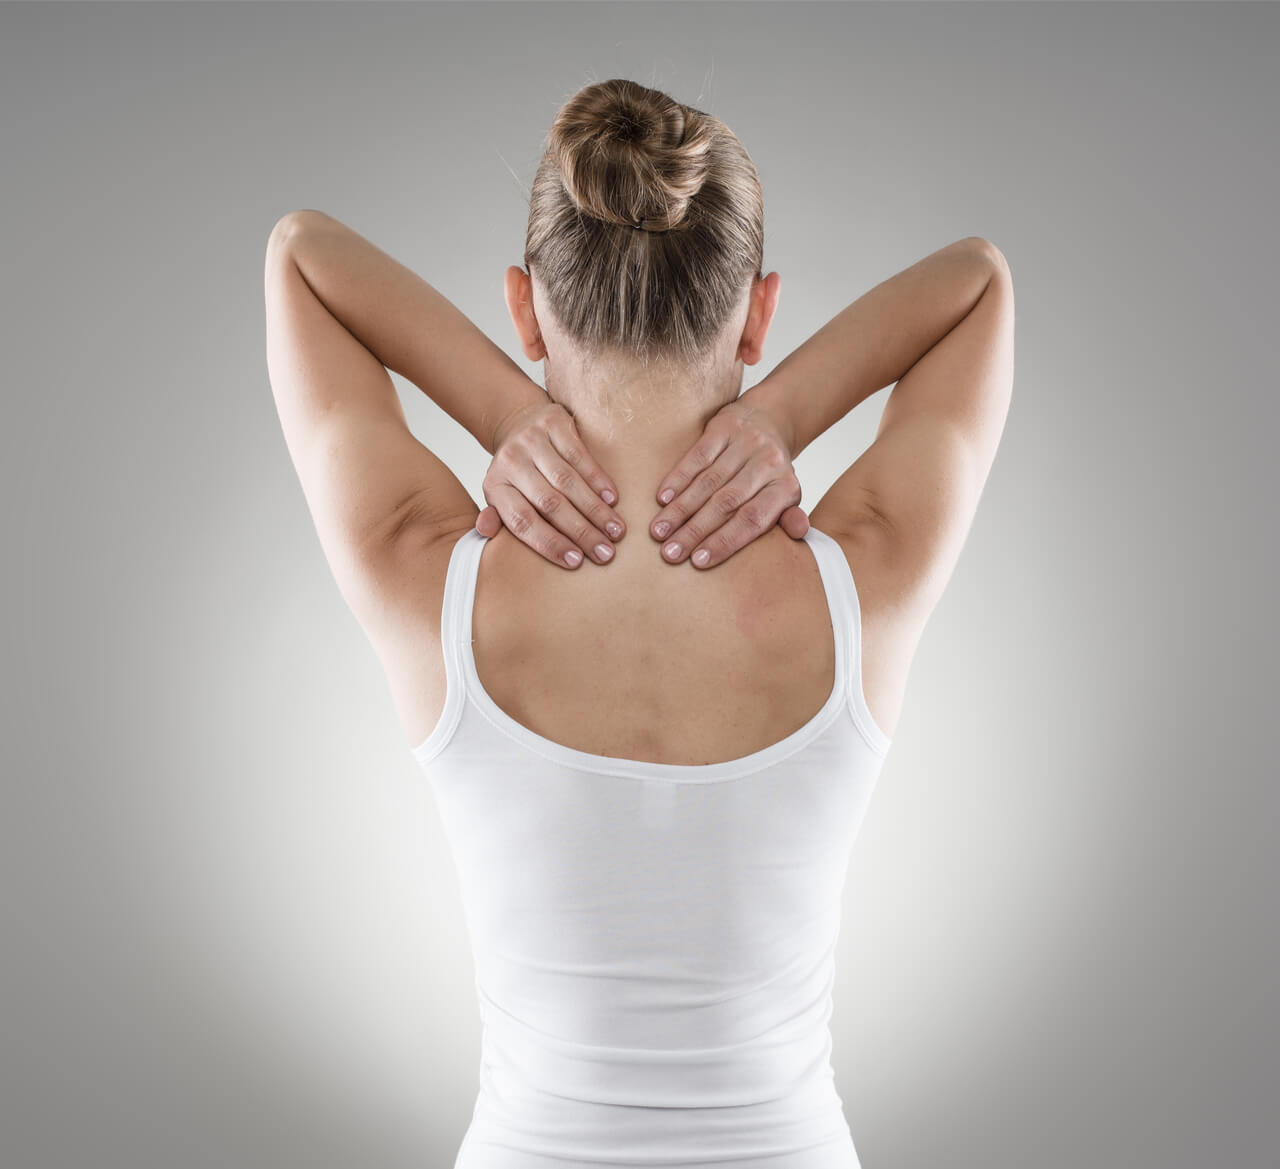 Exercises for Scoliosis and How to Do Them